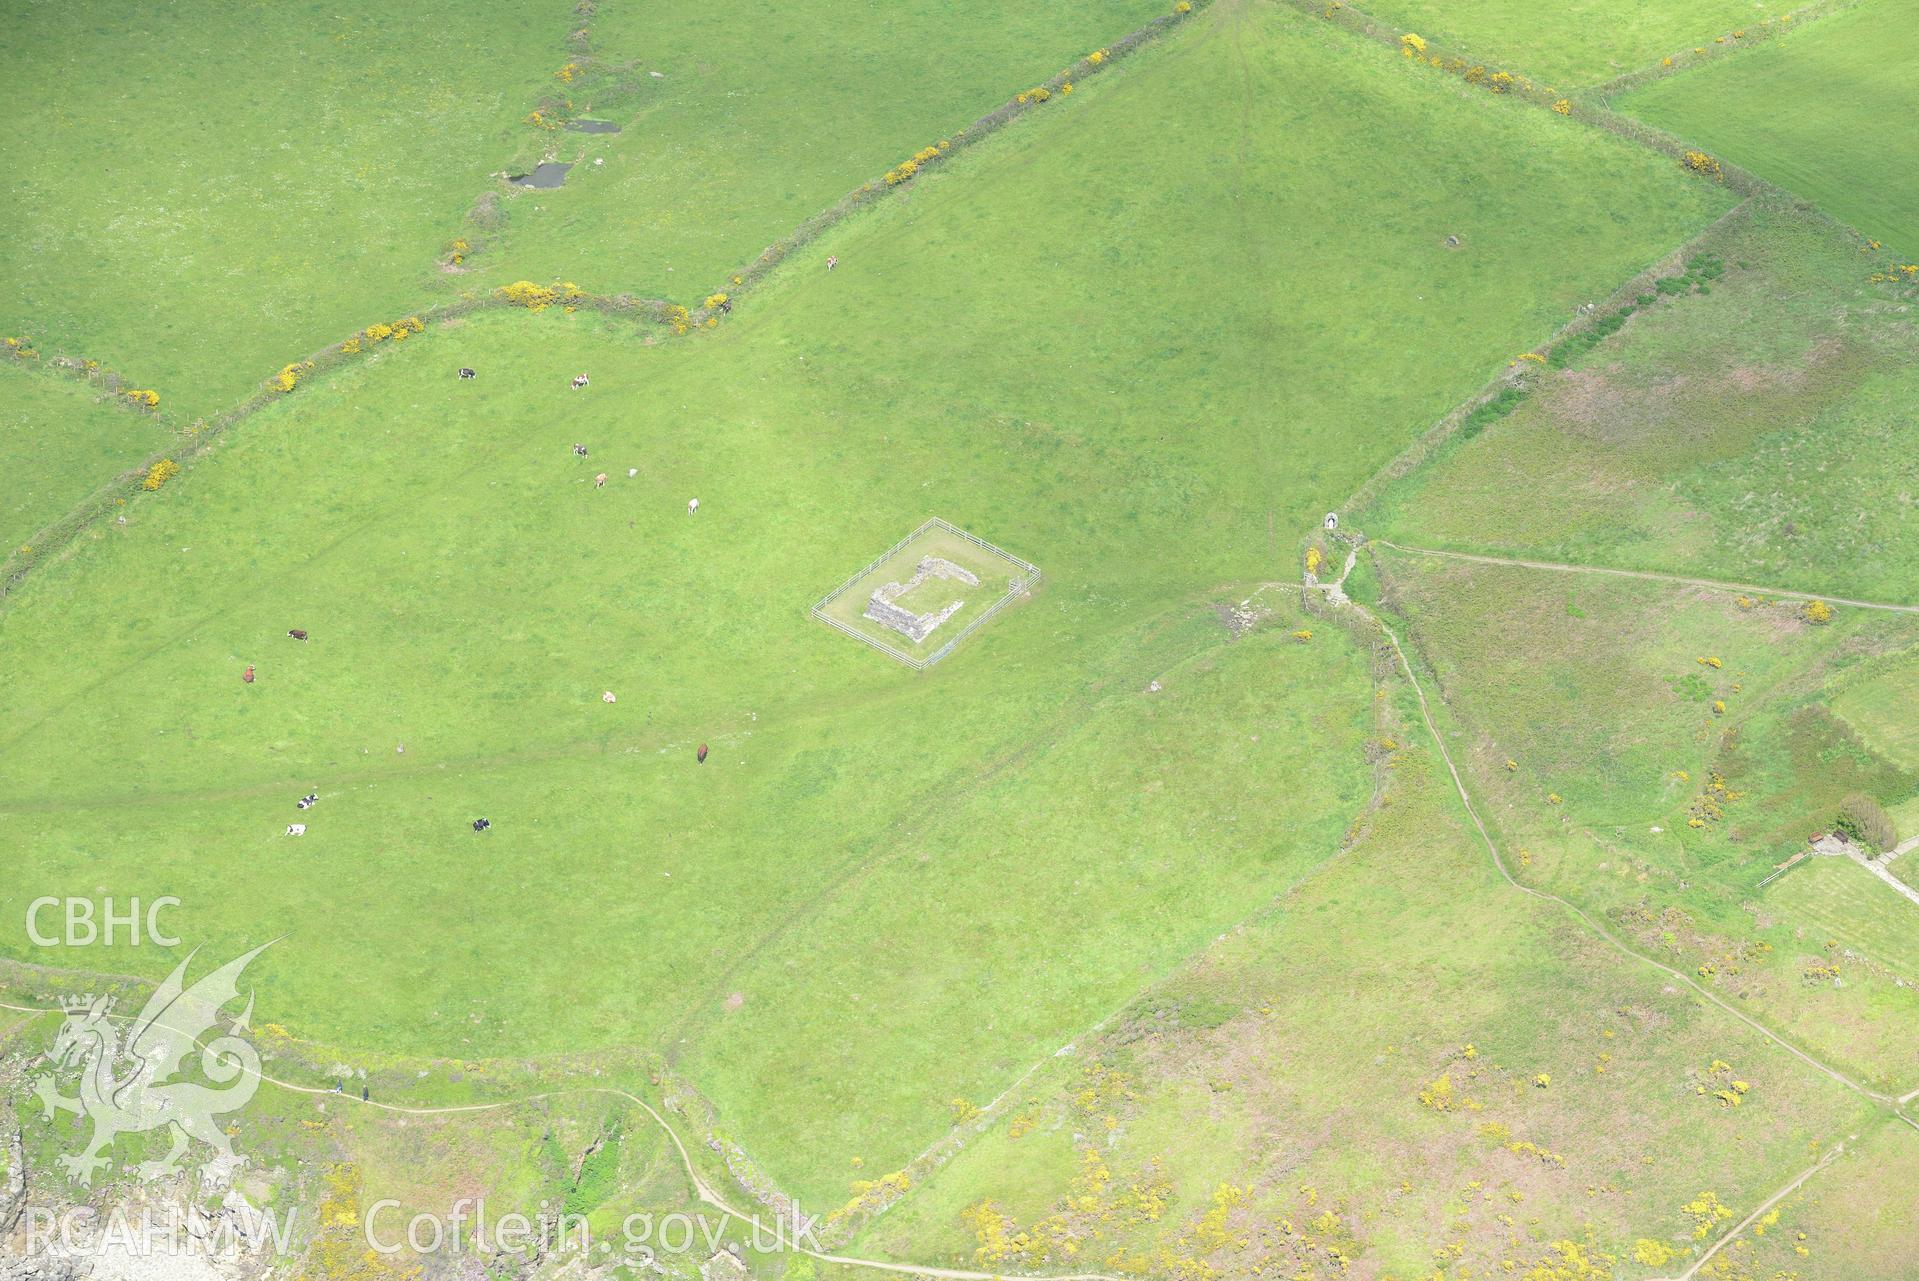 St. Non's chapel, near St. Davids. Oblique aerial photograph taken during the Royal Commission's programme of archaeological aerial reconnaissance by Toby Driver on 13th May 2015.